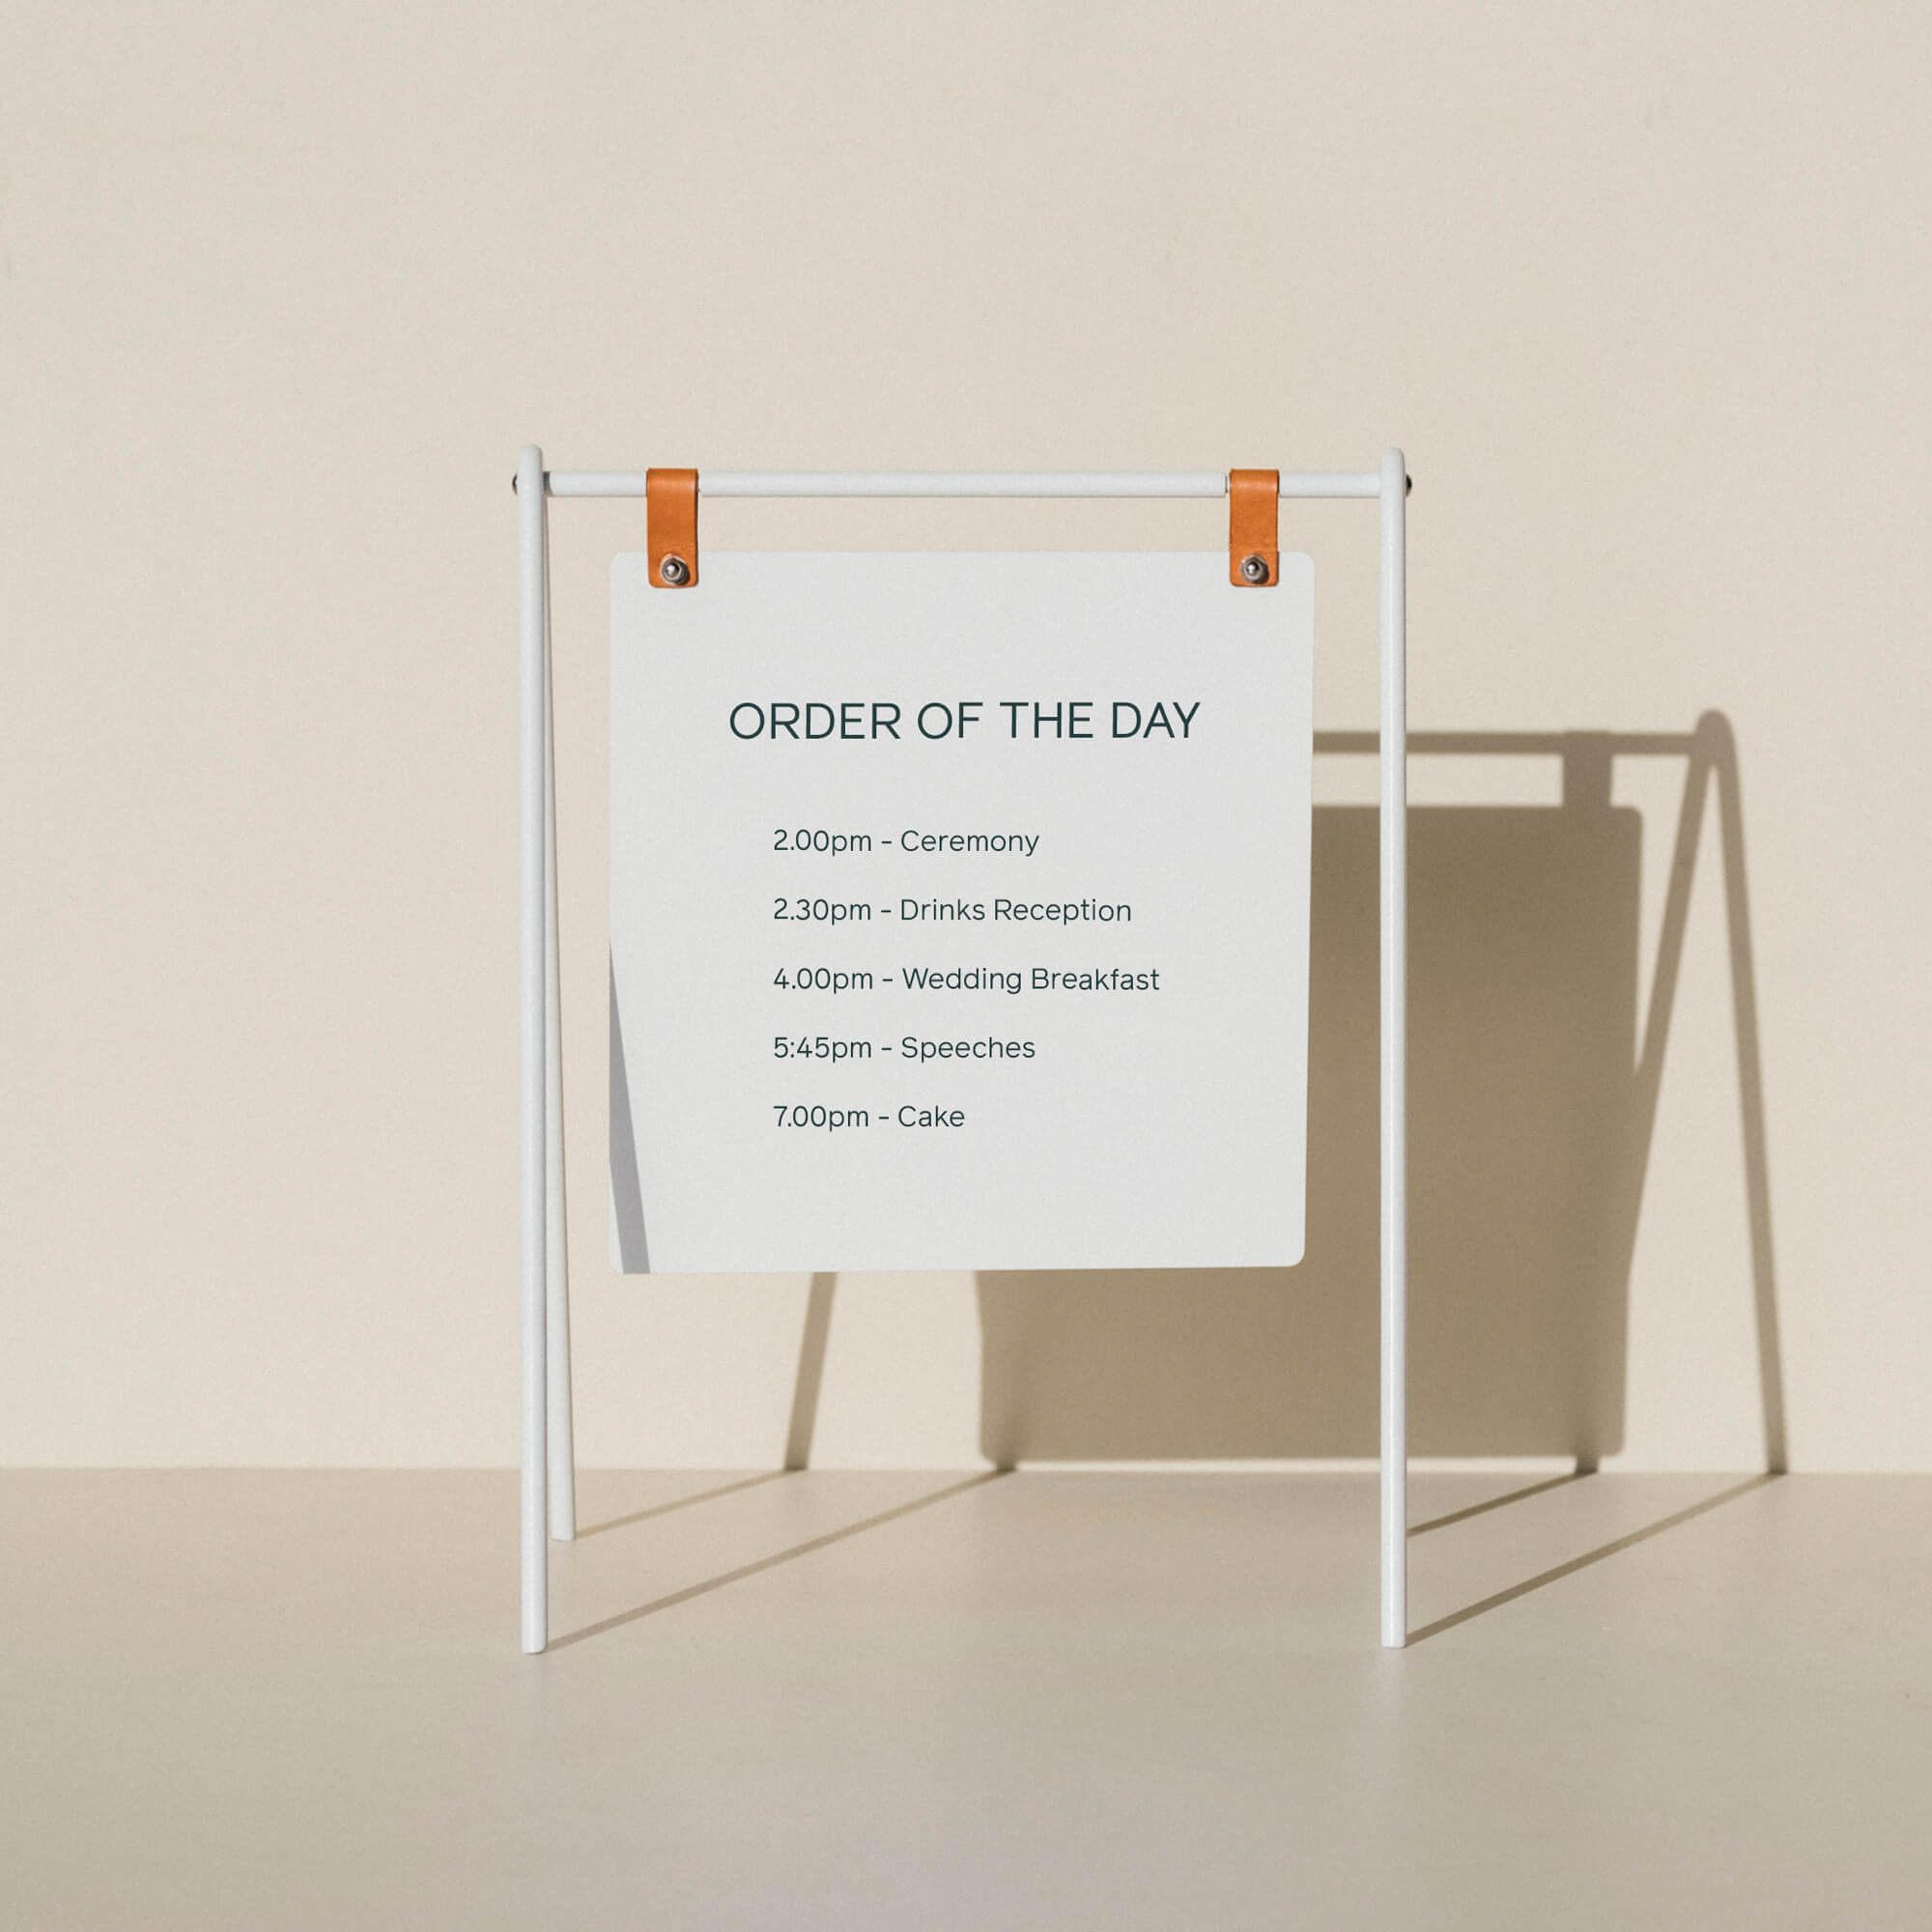 A miniature white A-frame sign displaying an order of the day for a wedding